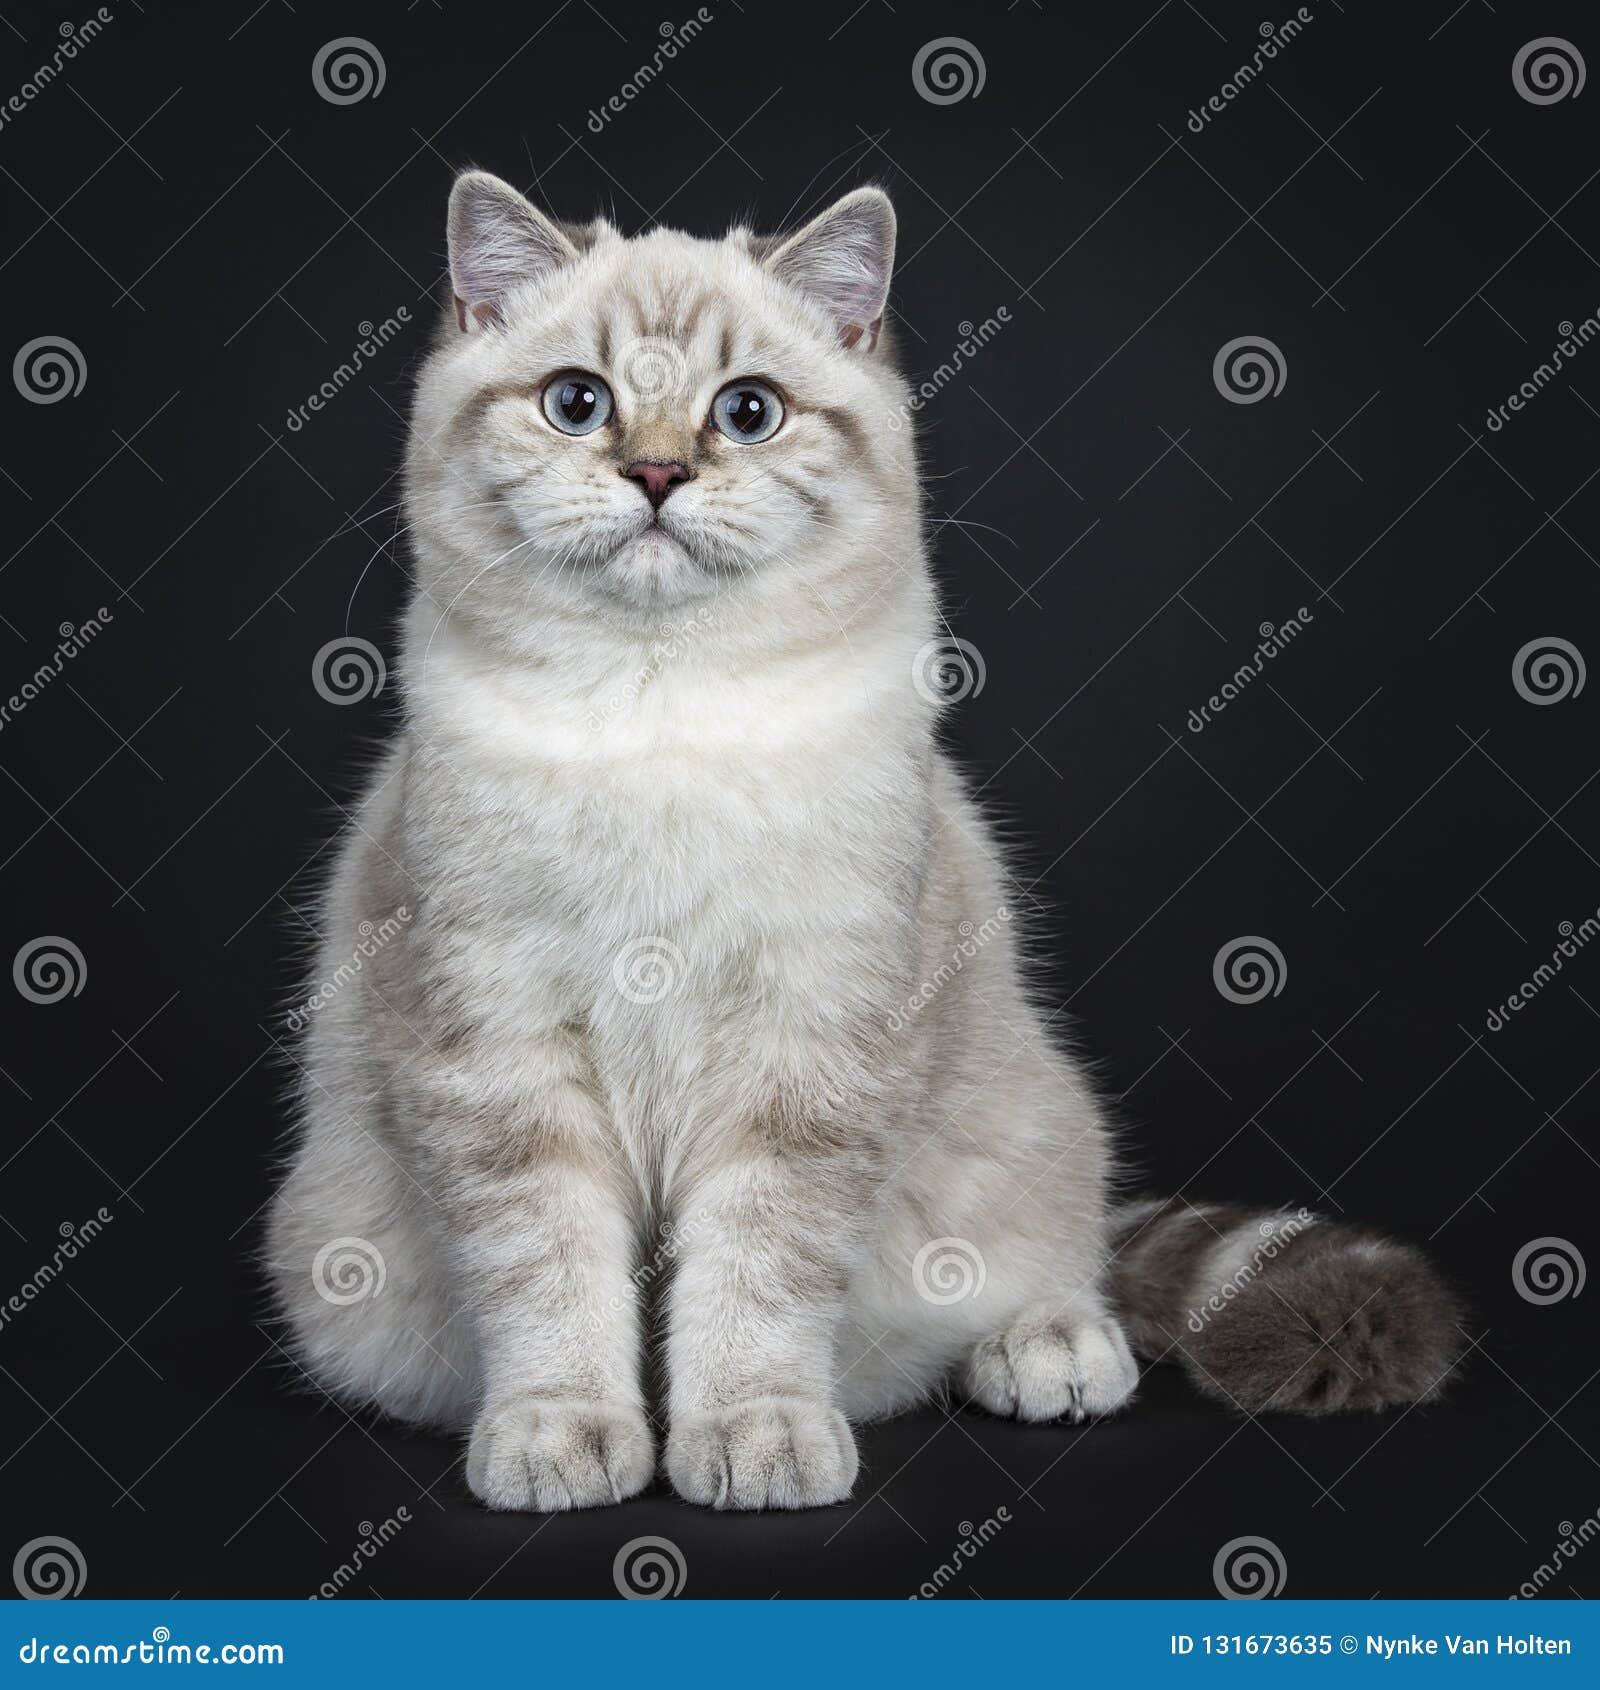 Super Cute Blue Tabby Point British Shorthair Cat Kitten Isolated On Black Background Stock Image Image Of Mammal Cute 131673635